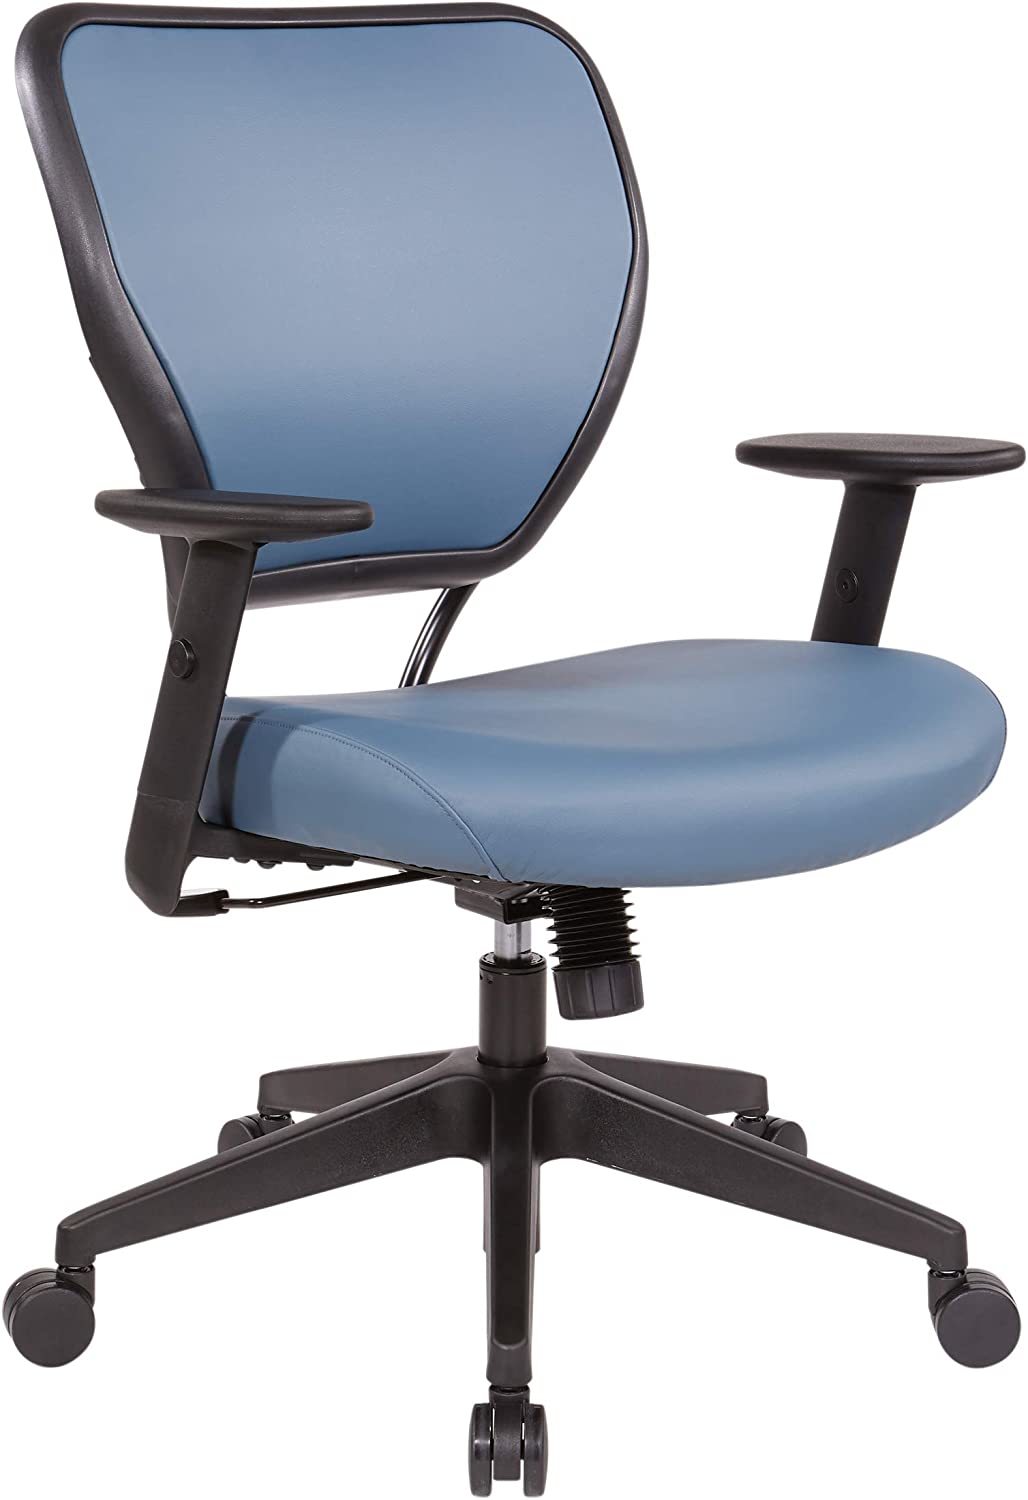 Primary image for Office Star 55 Series Air Grid Back Adjustable Manager's Task Chair with Lumbar